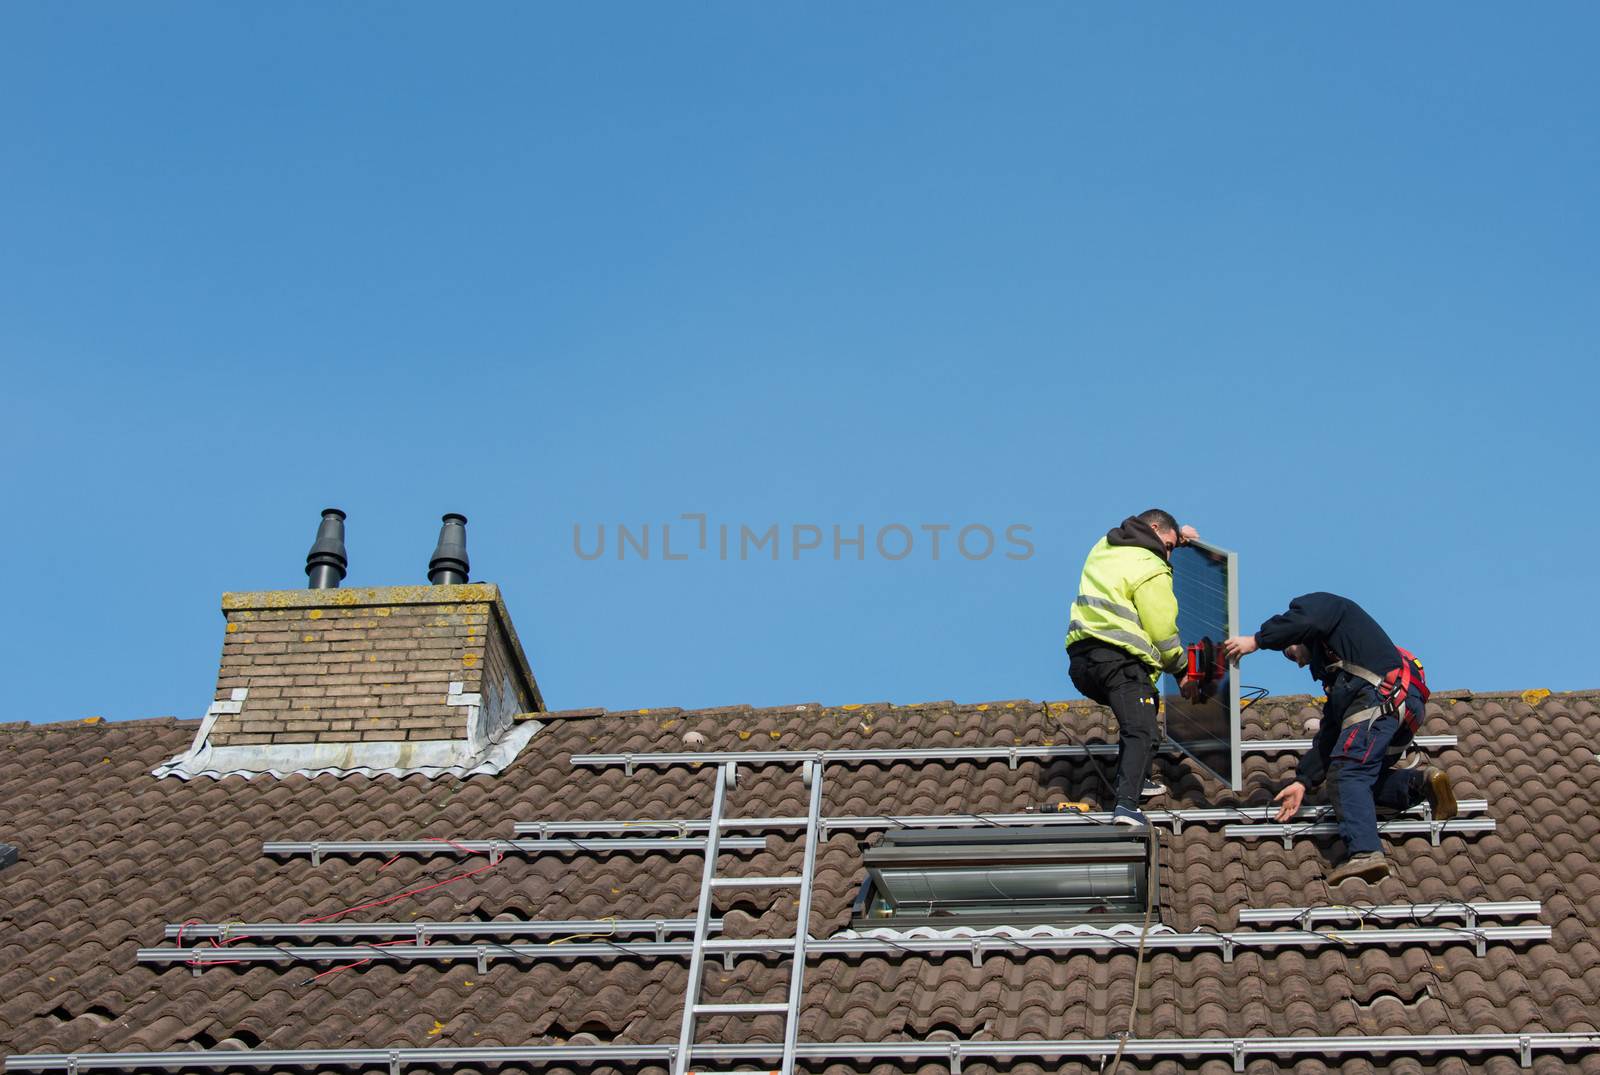 man putting the solar panel on the roof by compuinfoto